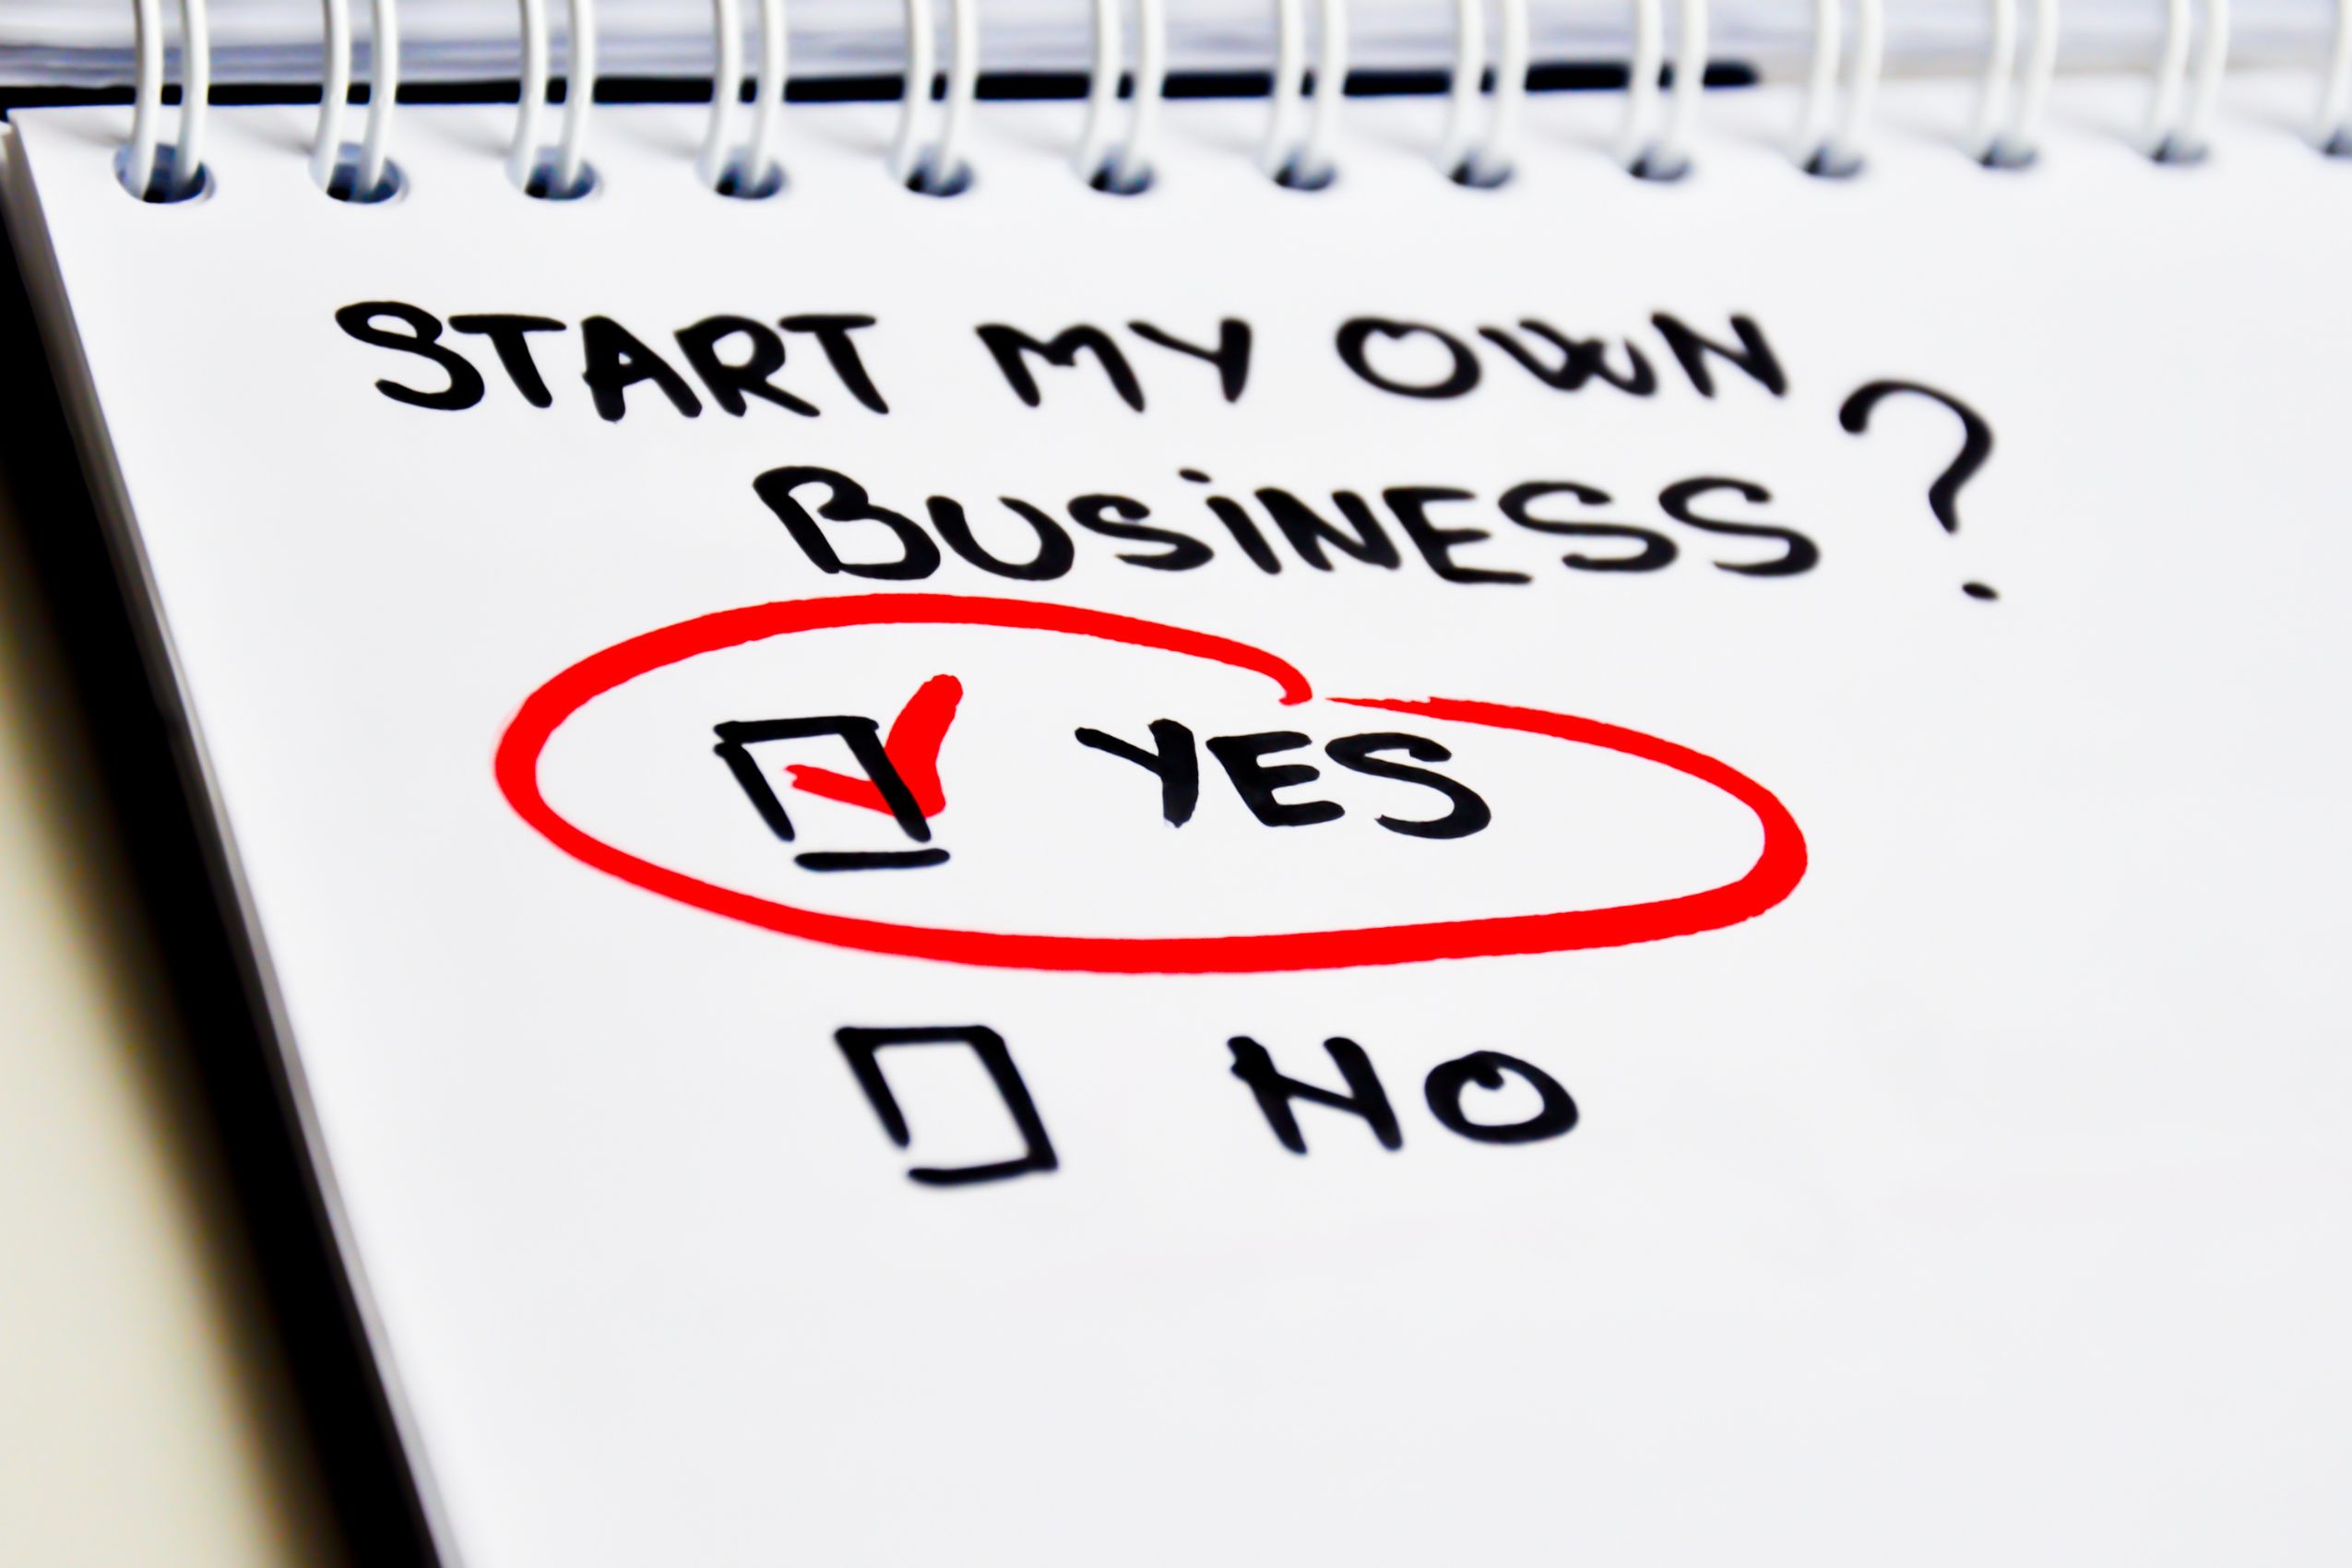 checklist for start my own business? Yes.